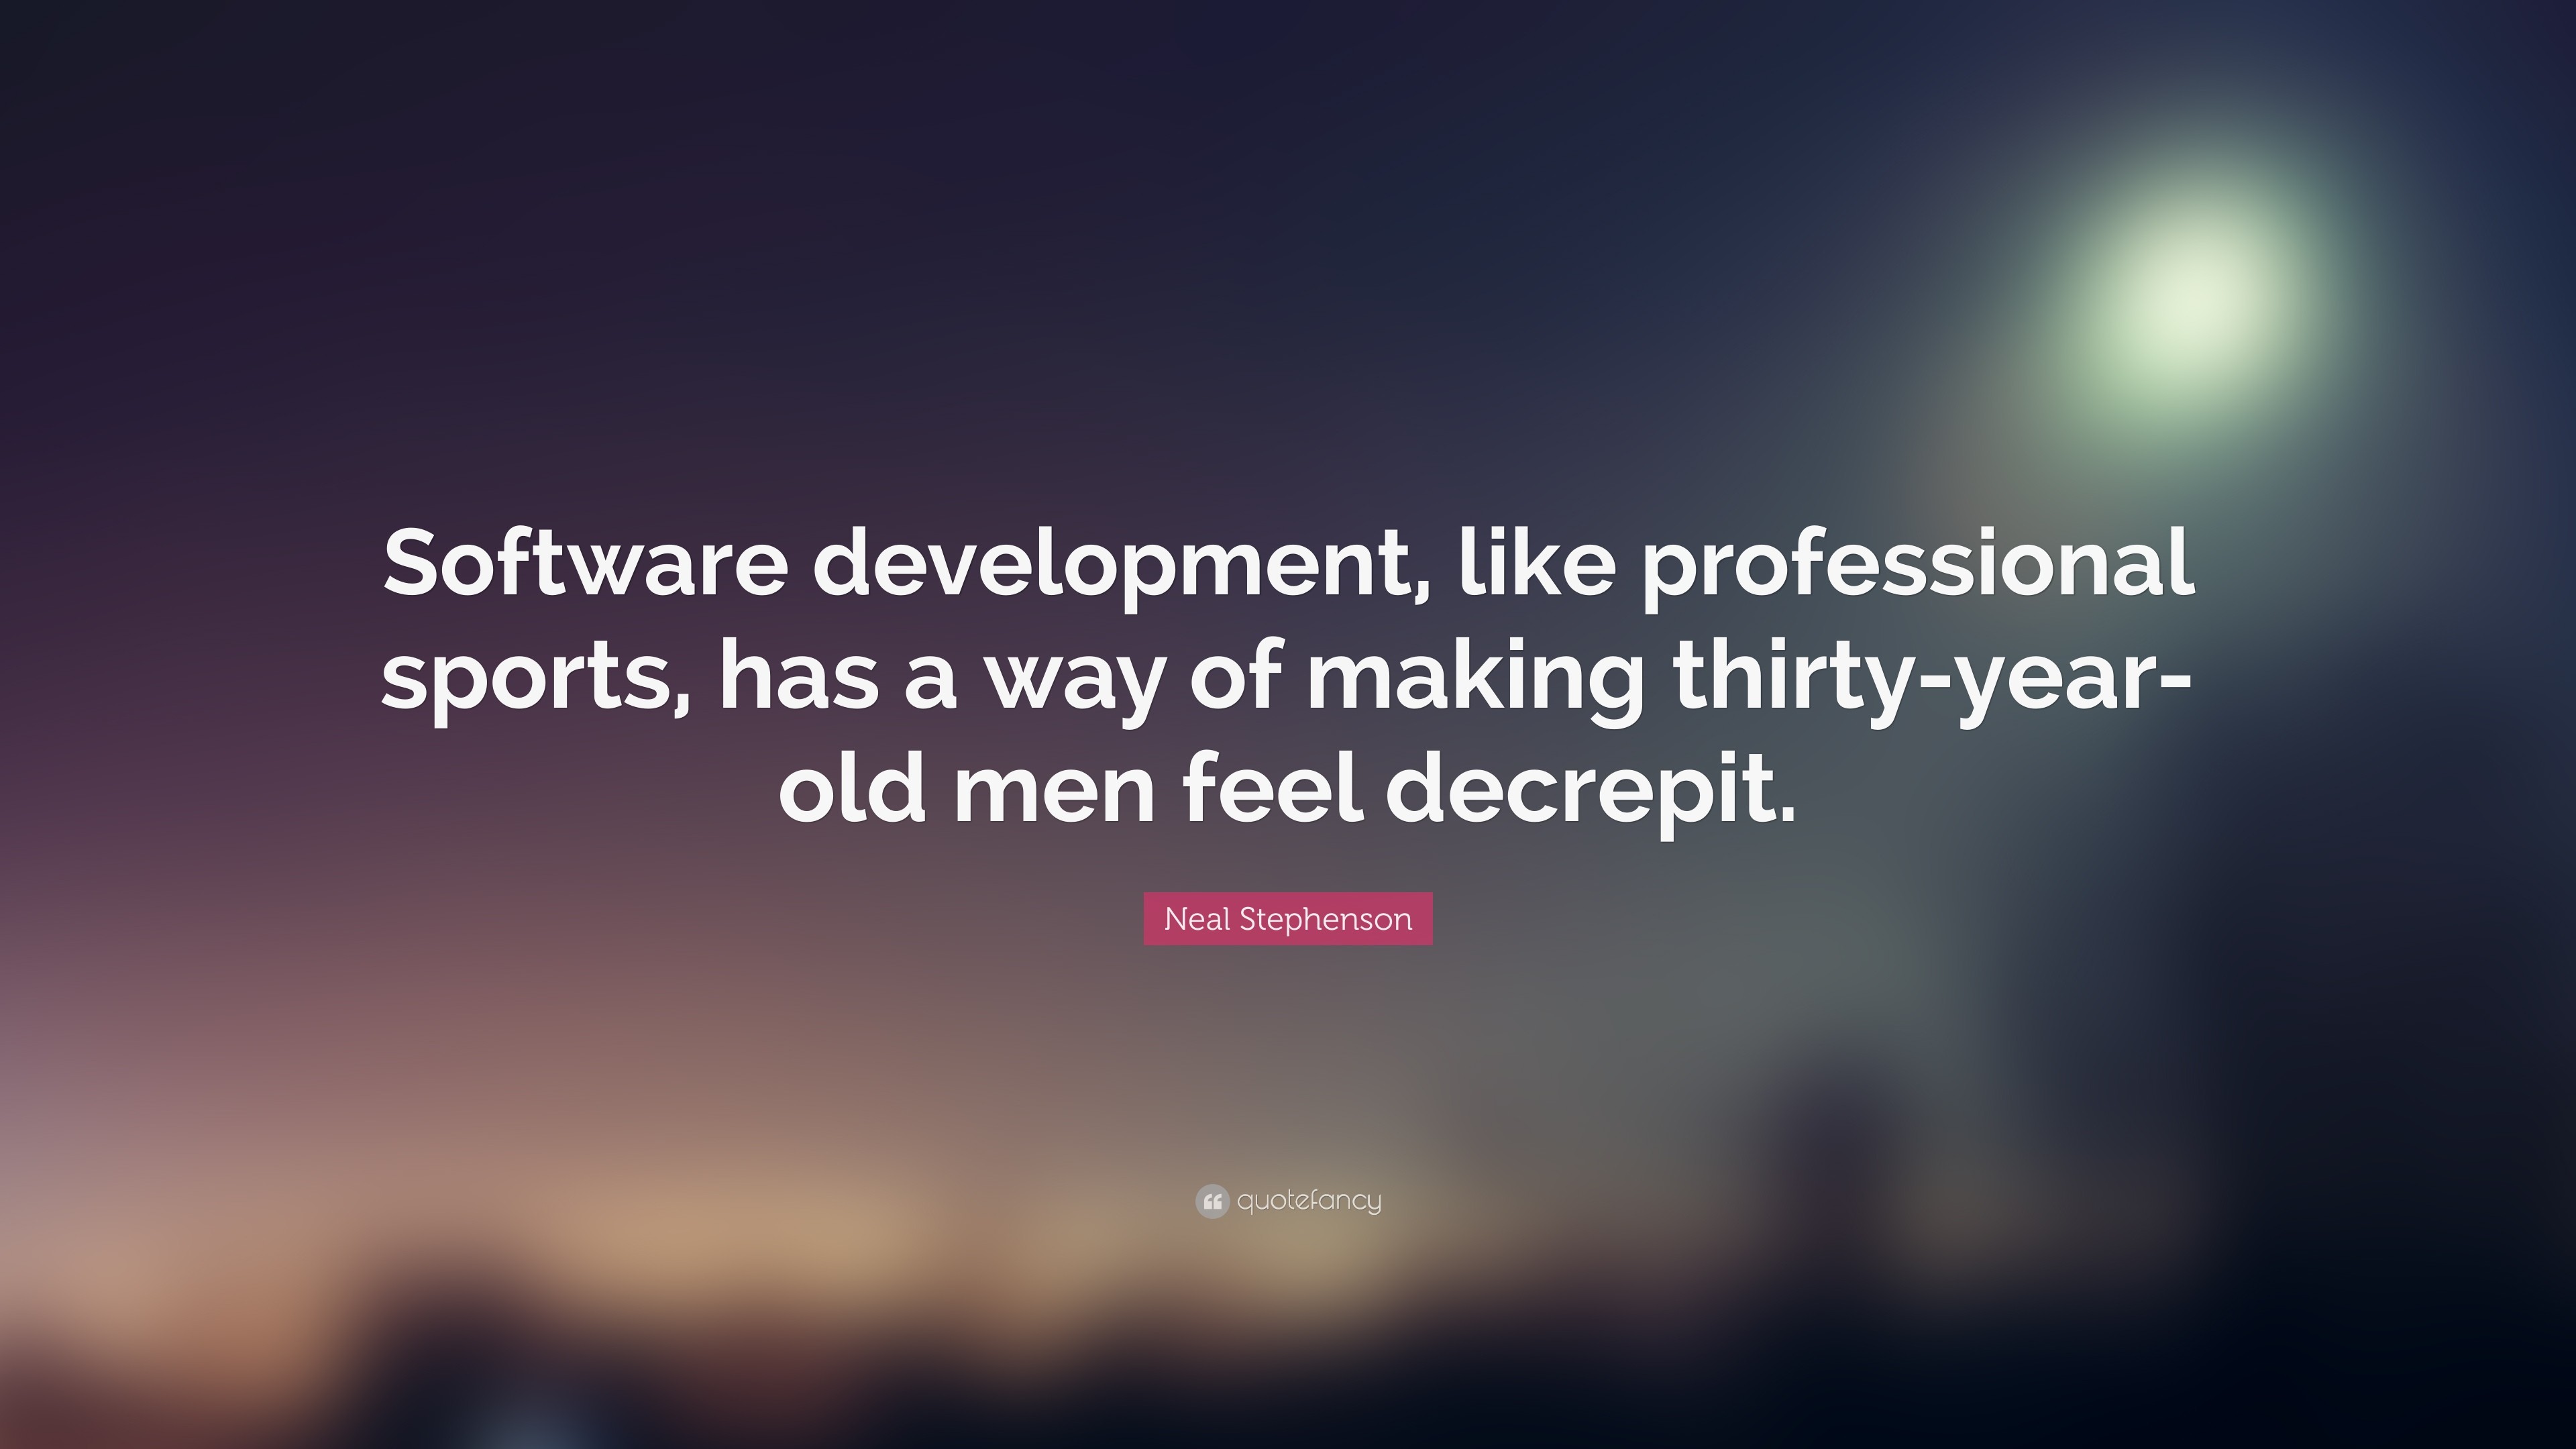 3840x2160 Neal Stephenson Quote: “Software development, like professional sports, has  a way of